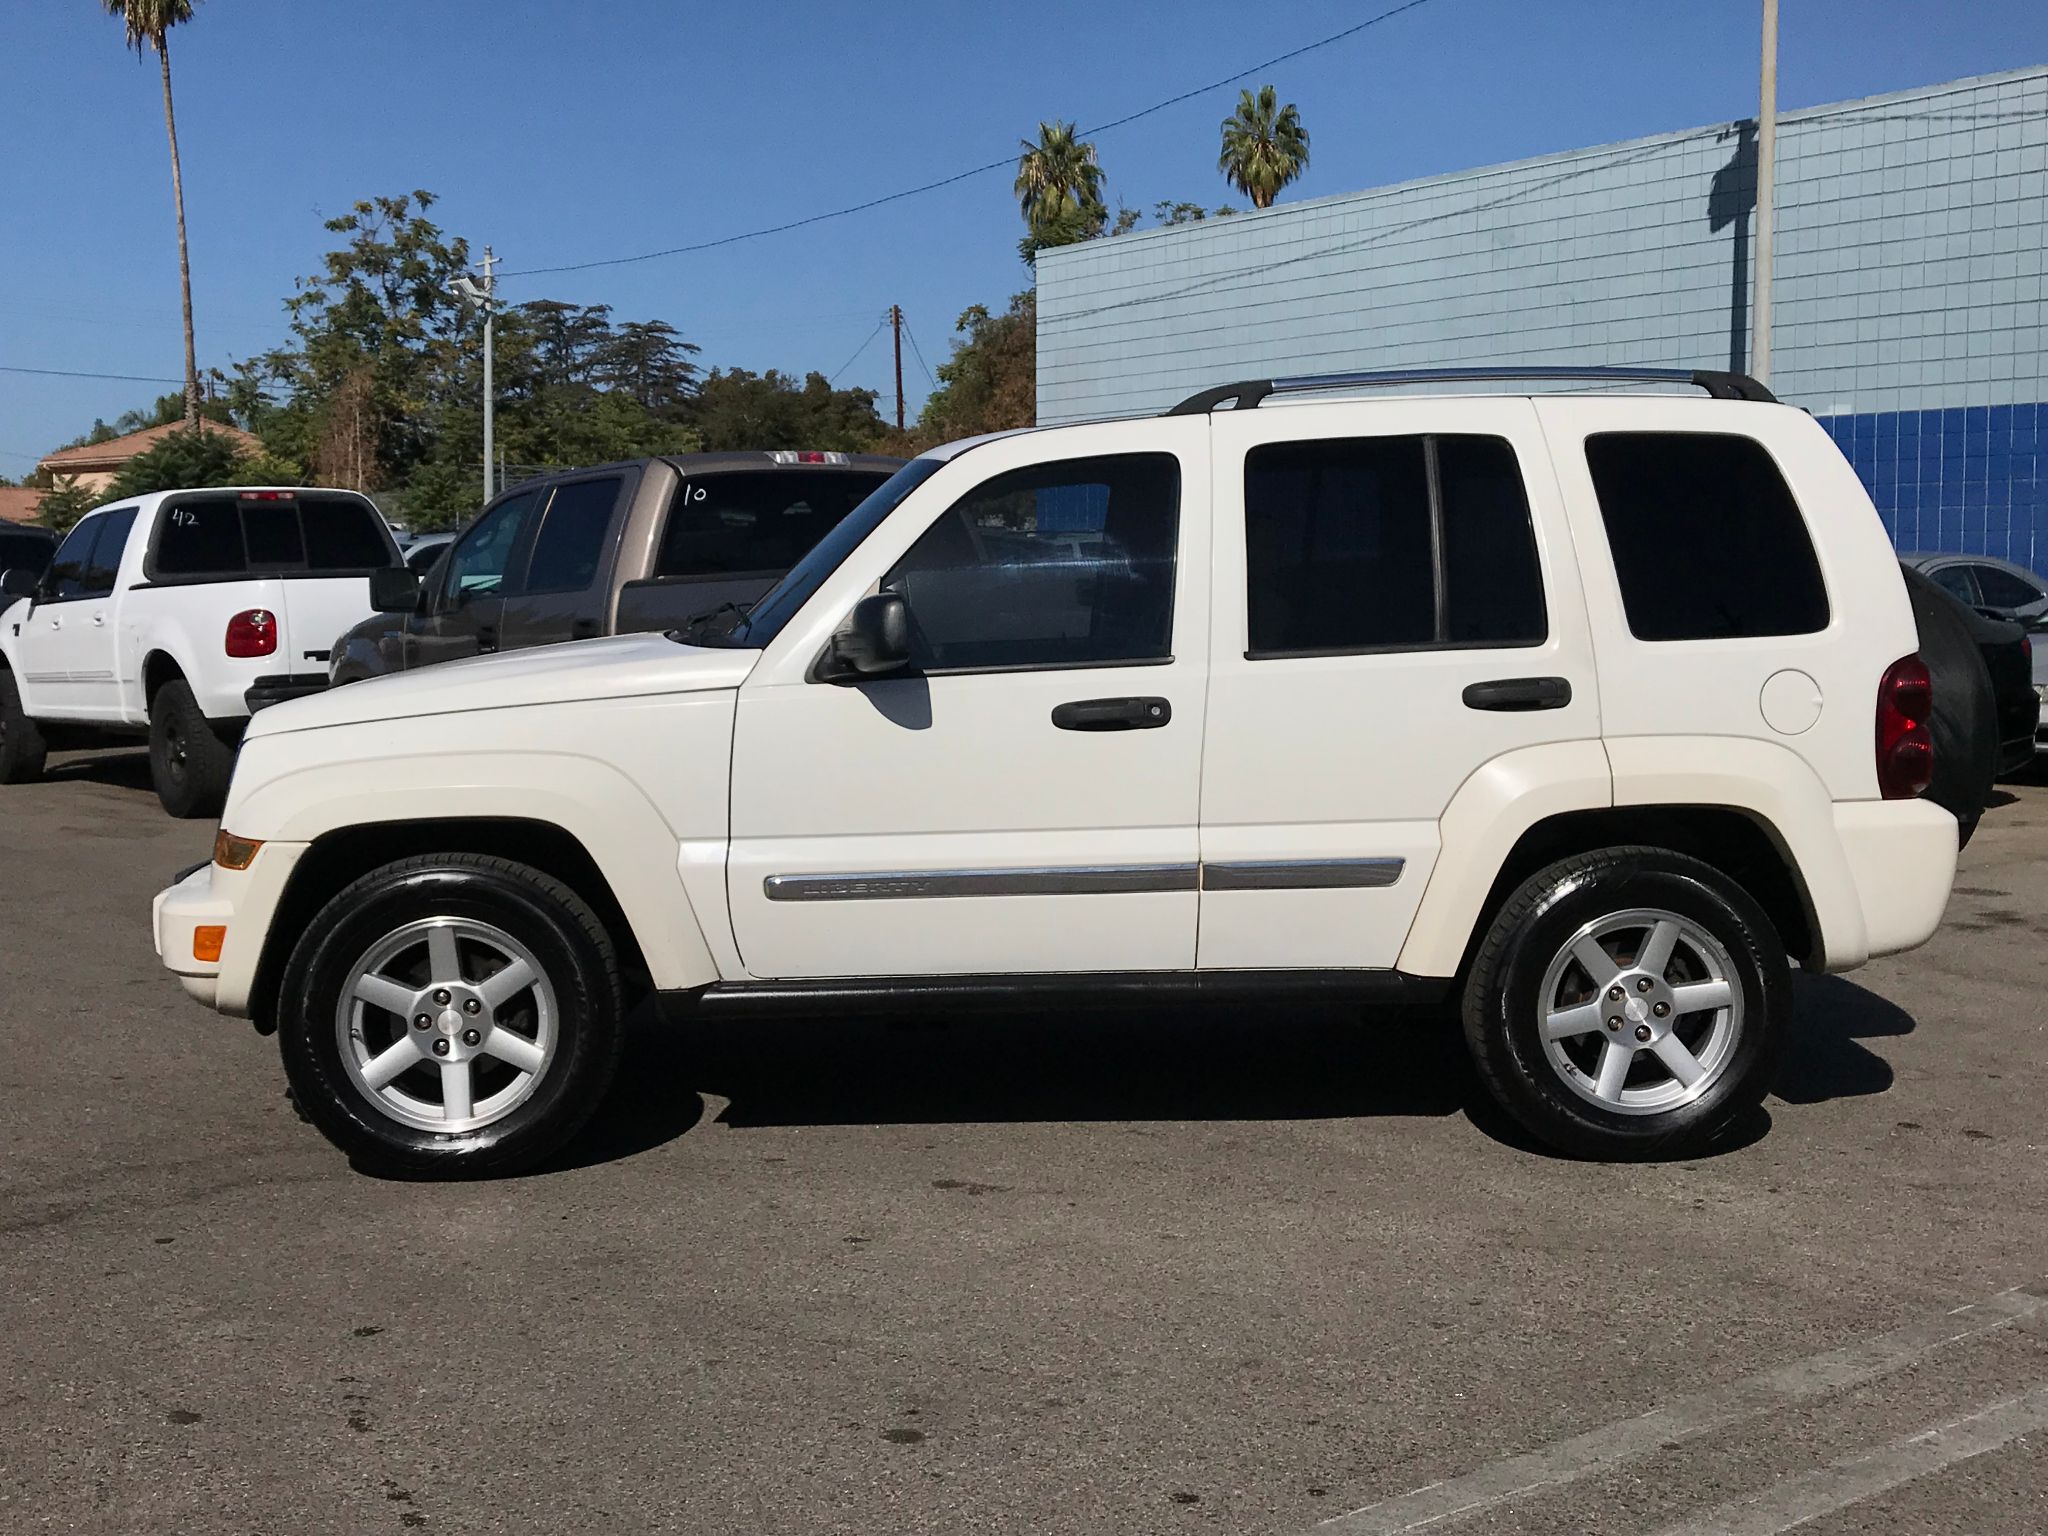 Used 2006 Jeep Liberty Limited at City Cars Warehouse INC